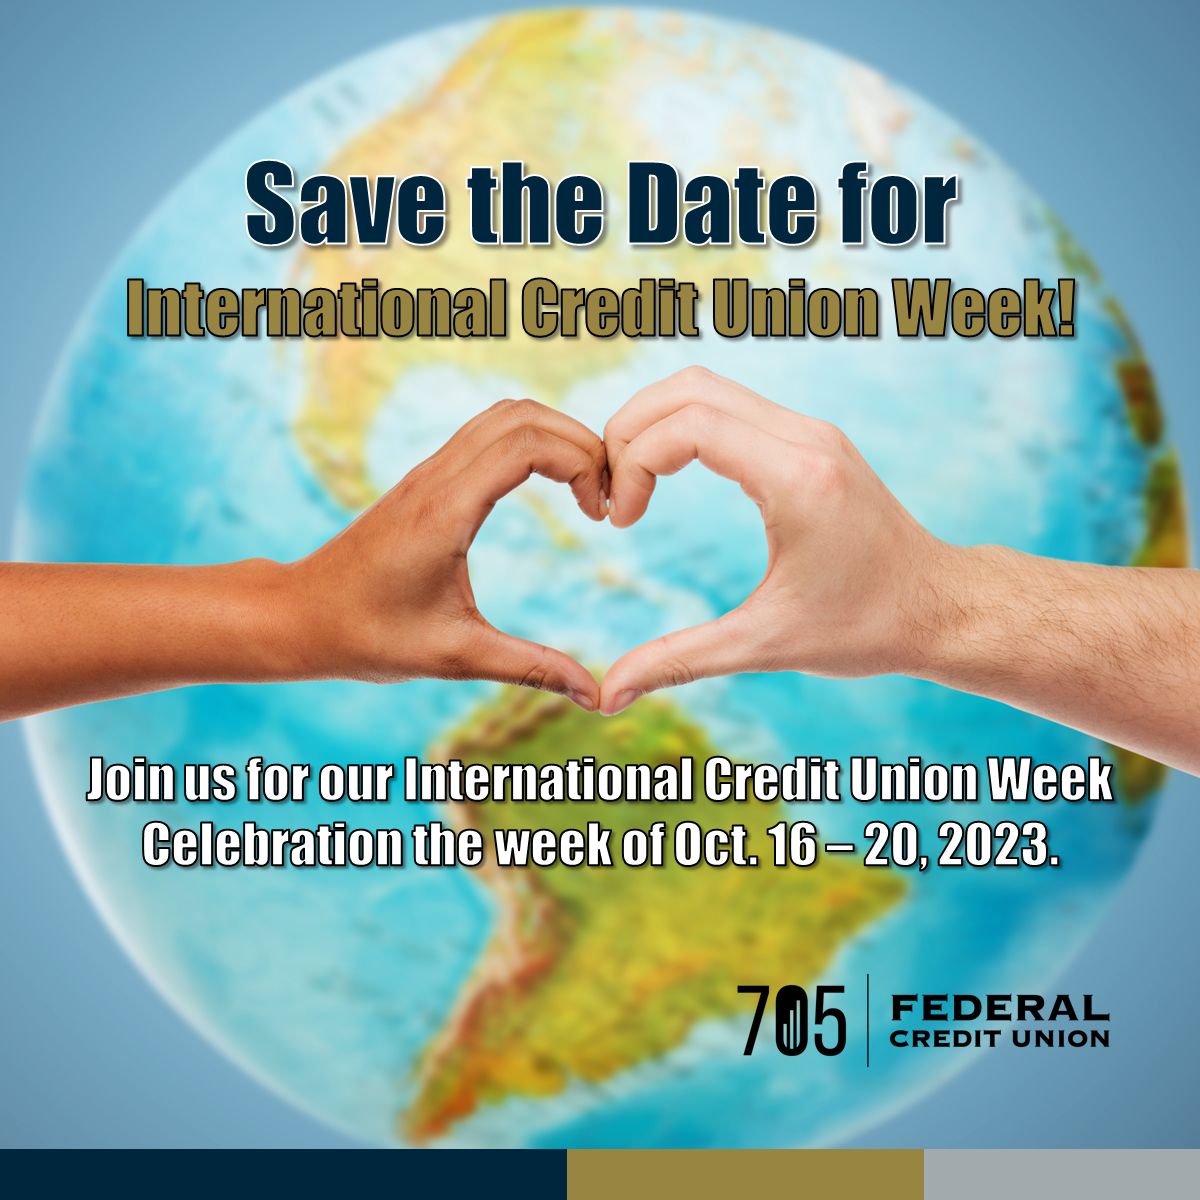 Save the Date for International Credit Union Week! Join us for our International Credit Union Week Celebration the week of Oct. 16 - 20, 2023.